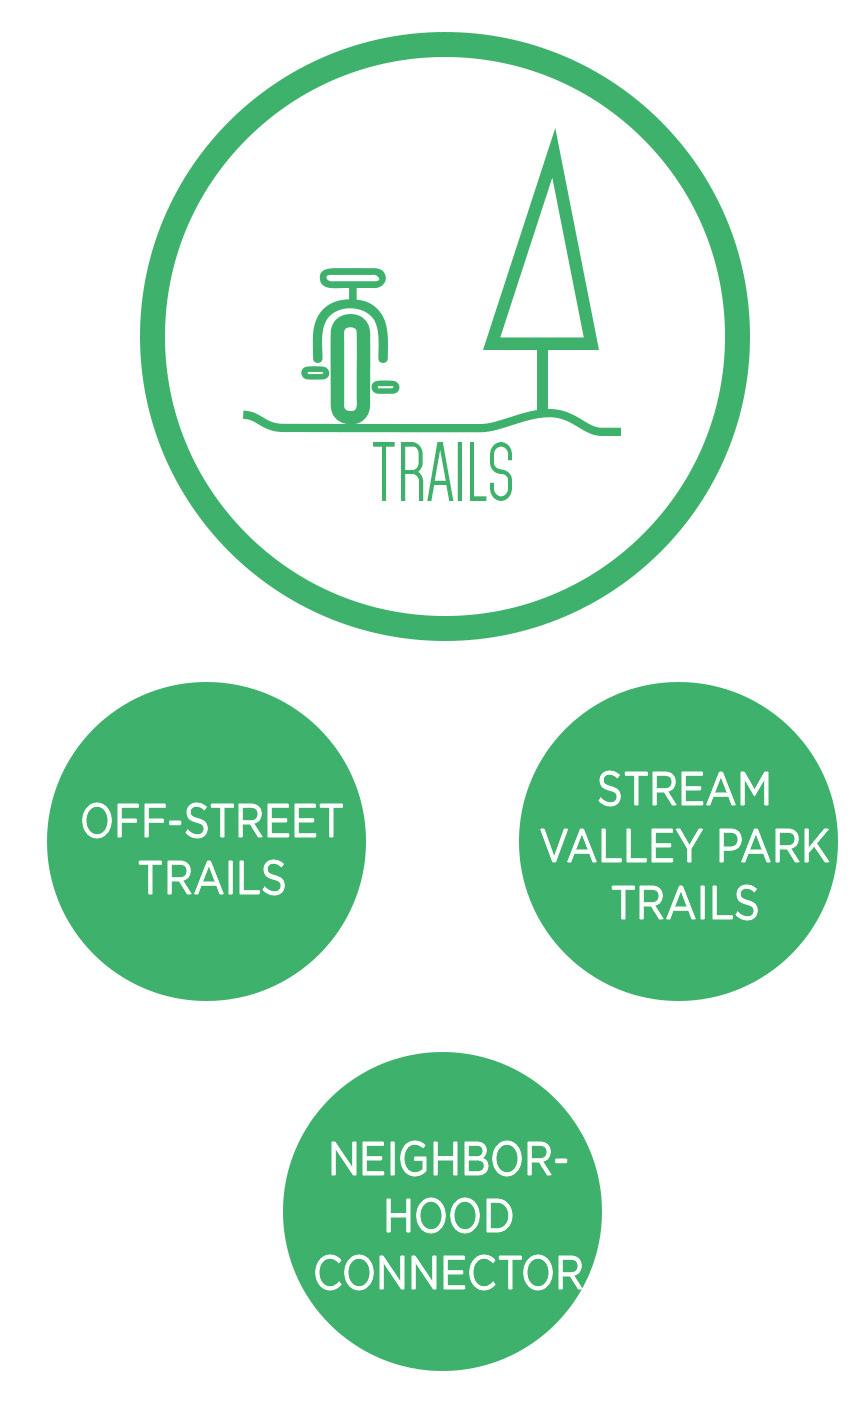 Stream Valley Park Trails These trails are shared use paths located within a county stream valley park that provide two-way routes for people